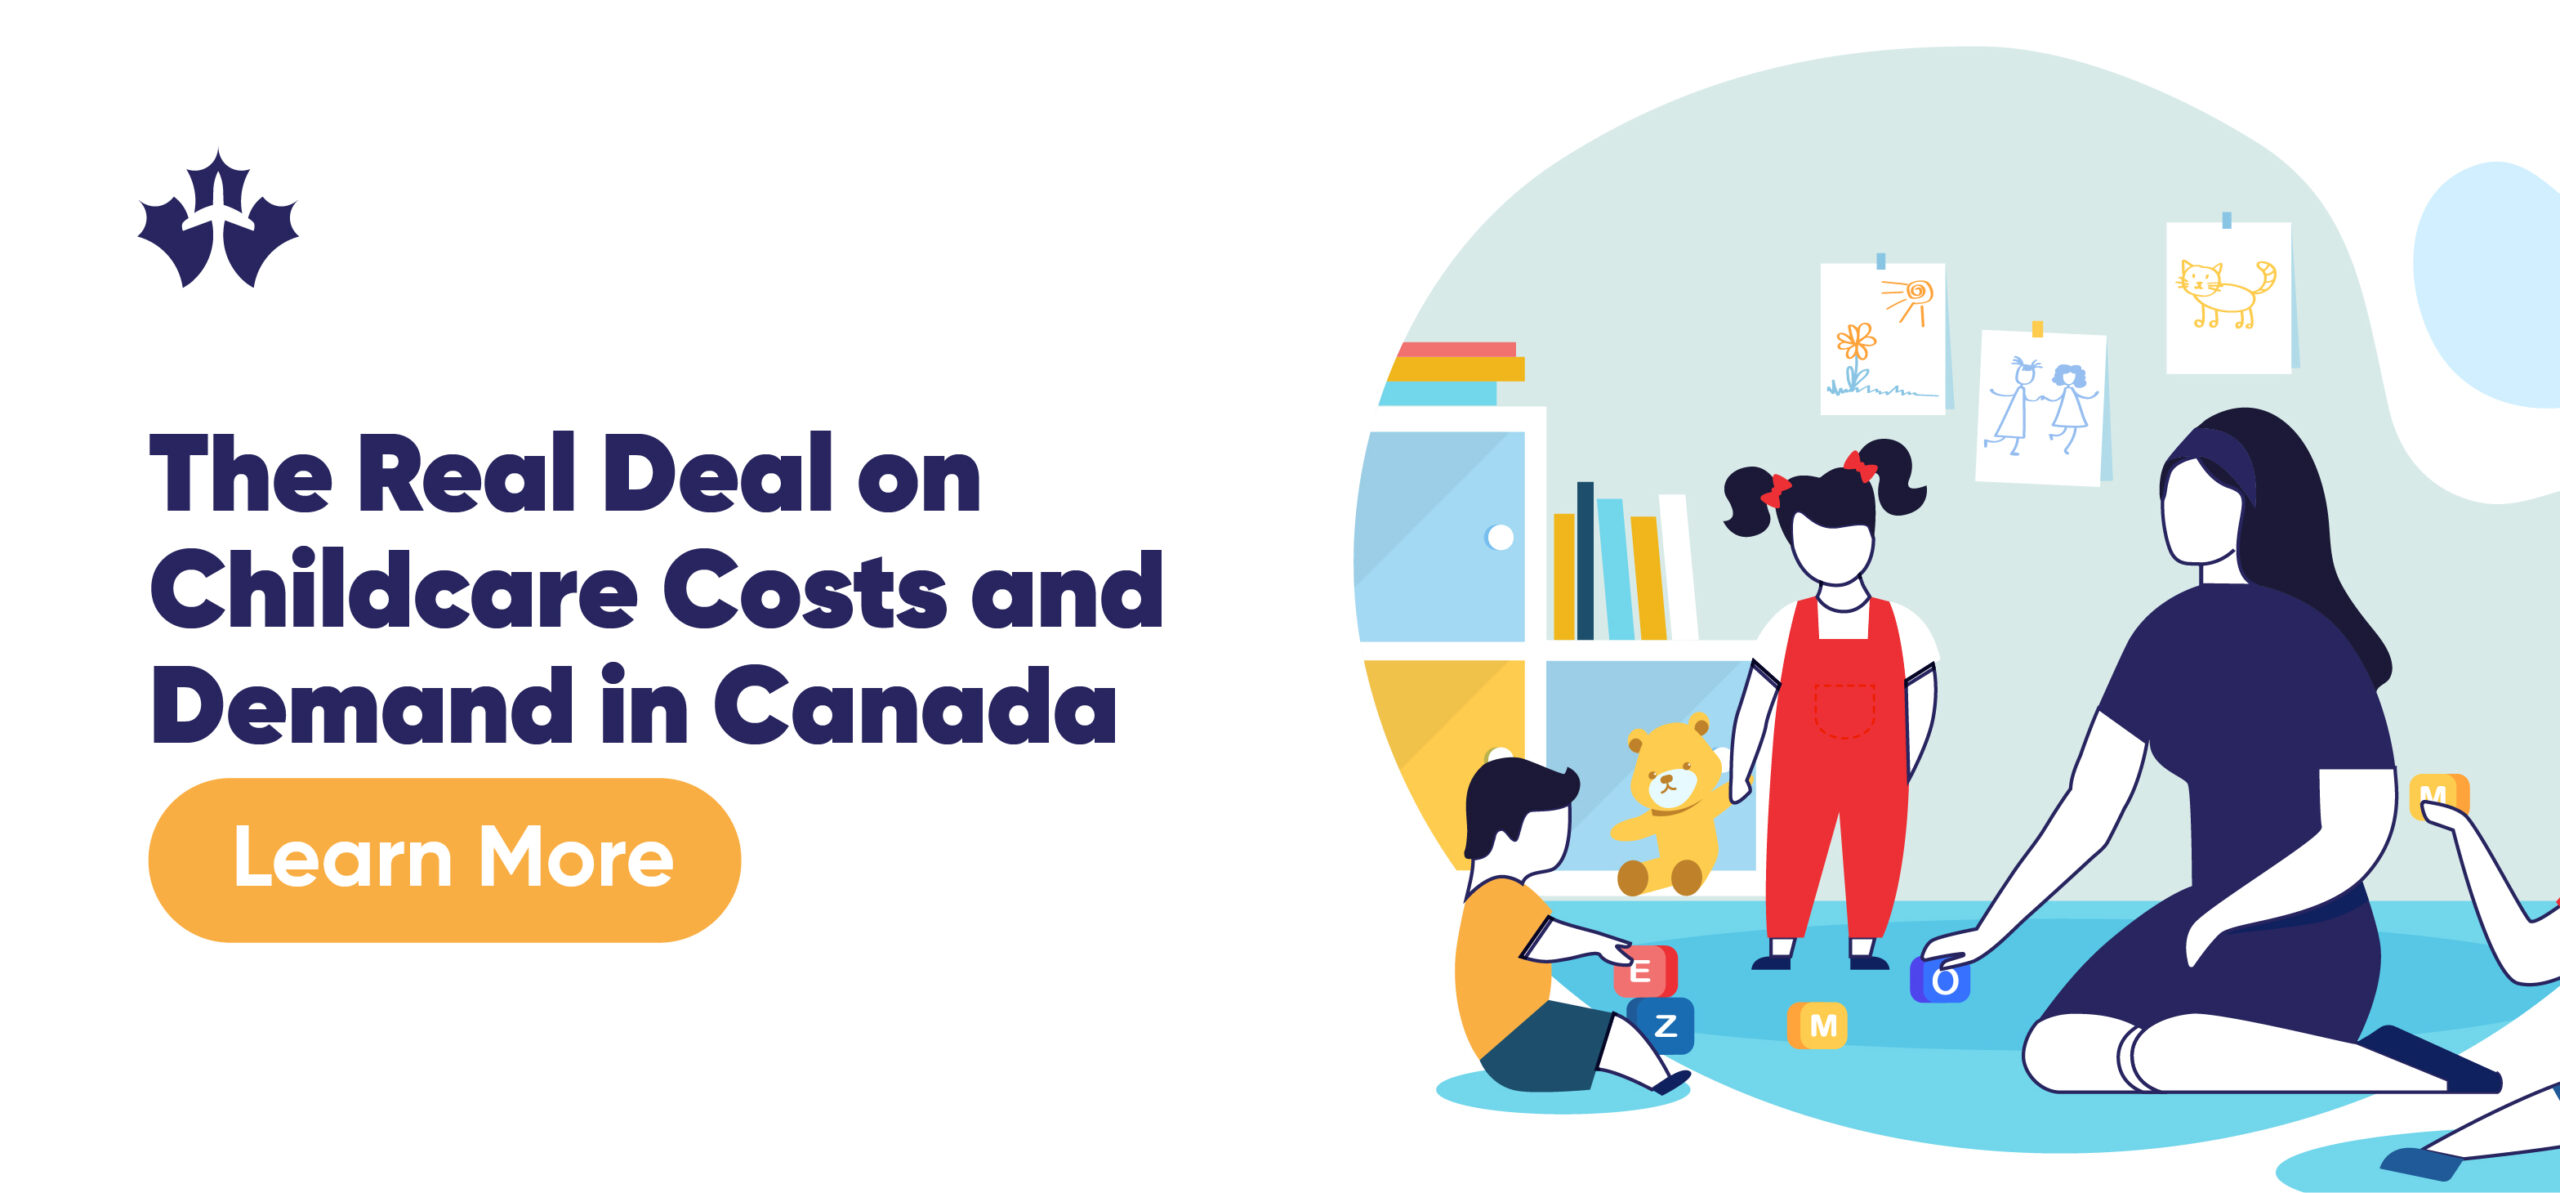 What is the Cost and Demand of Childcare in Canada